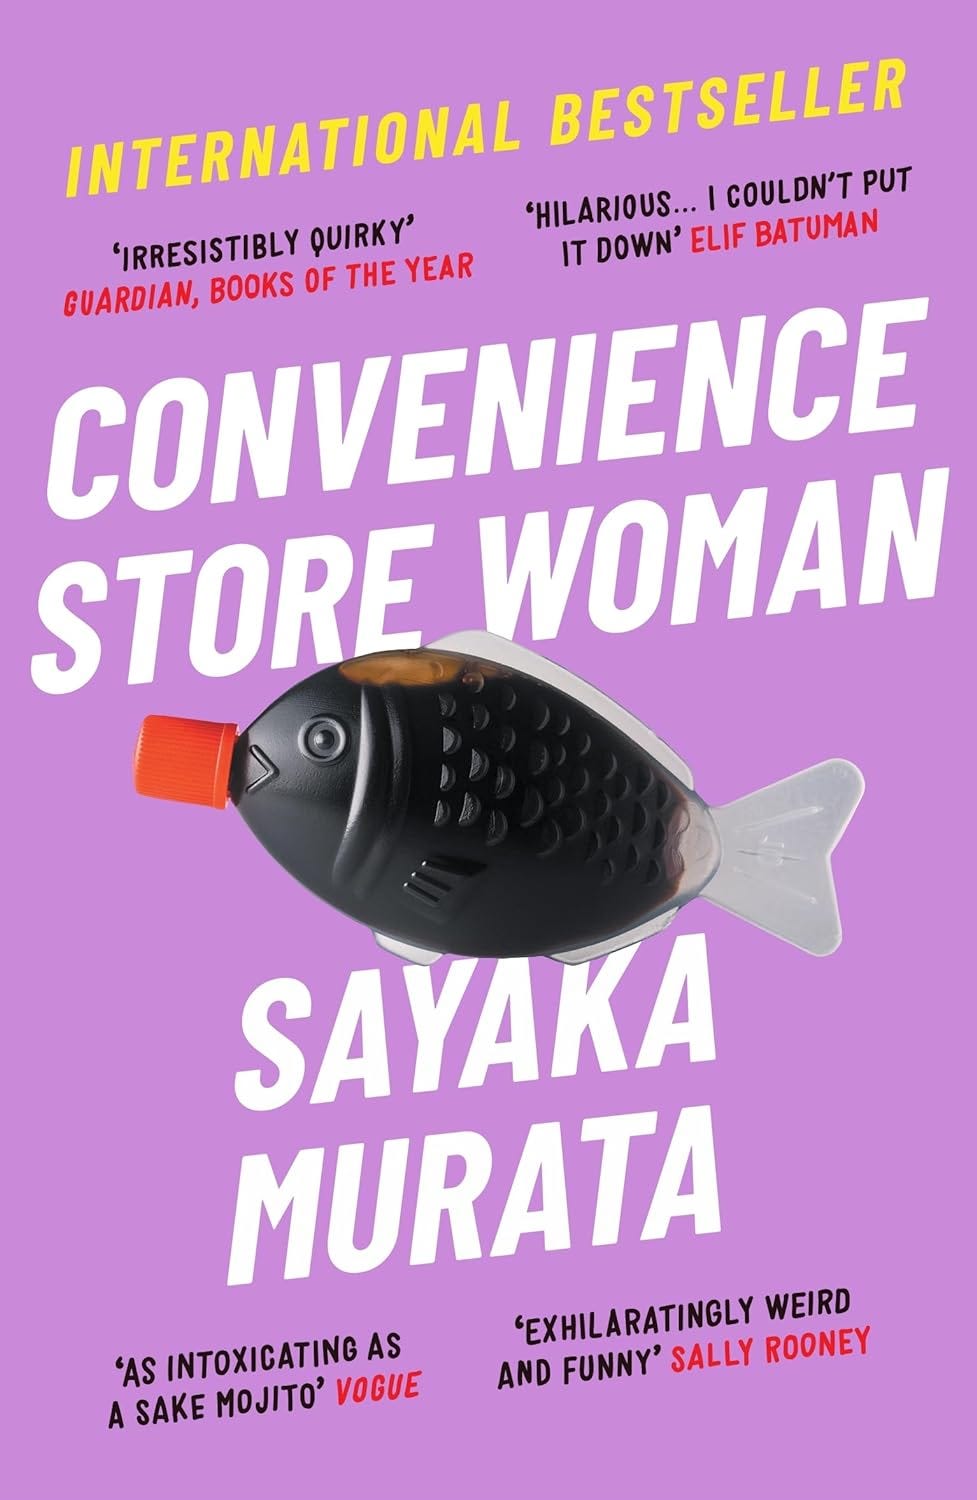 A photo of the book Convenience Store Woman by Sayaka Murata